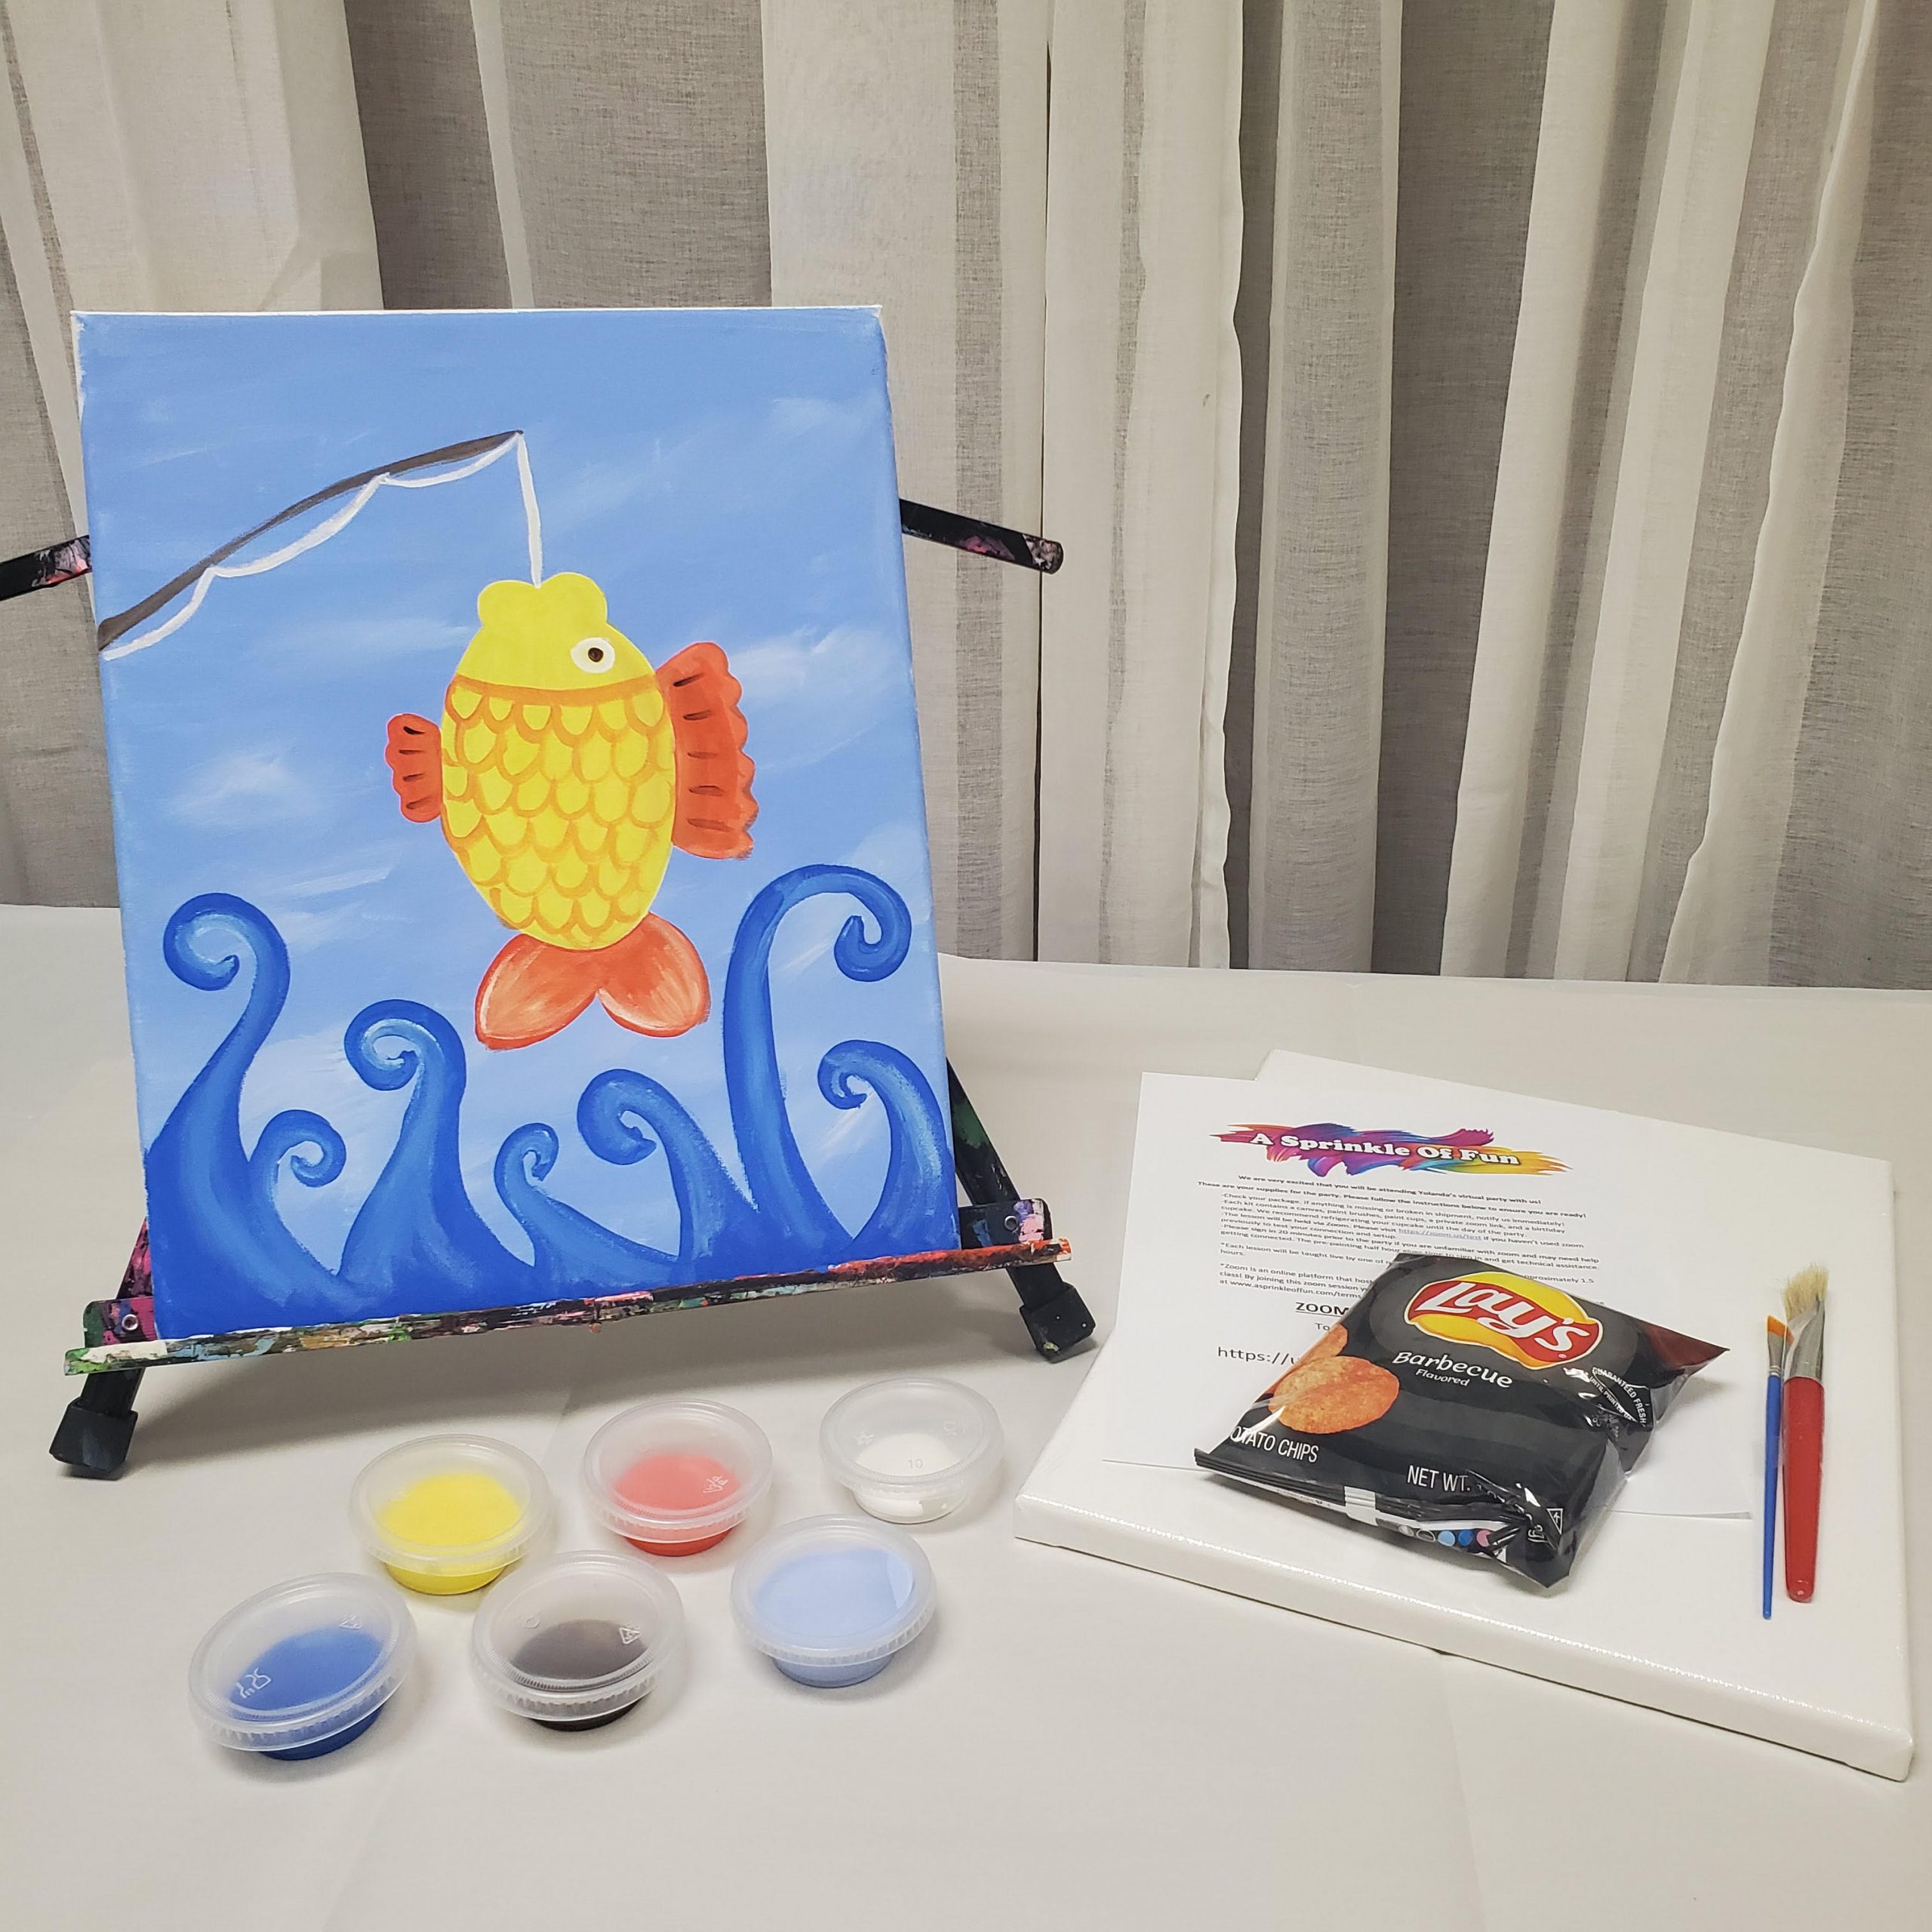 New Tabletop Easel - A Sprinkle of Fun